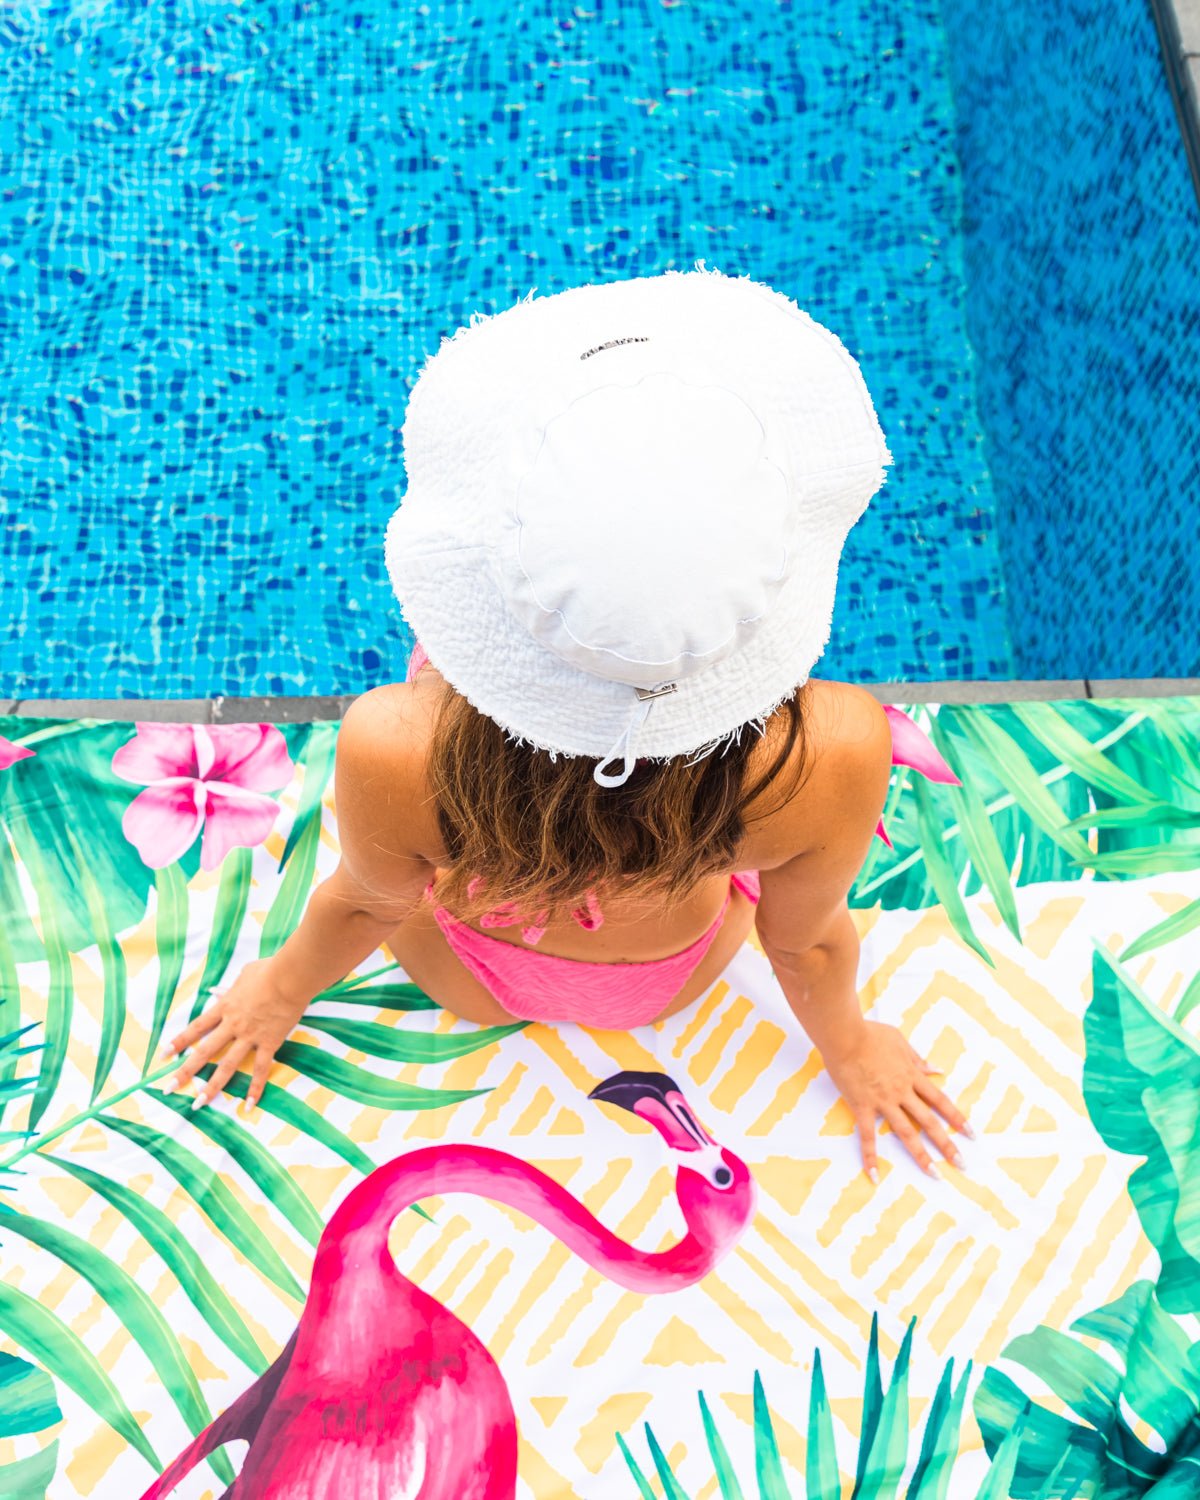 A girl sitting on the pool on a Quick Dry, Sand Free, Light Weight, Compact and Ecofriendly Microfiber Beach Towel from La Toalla